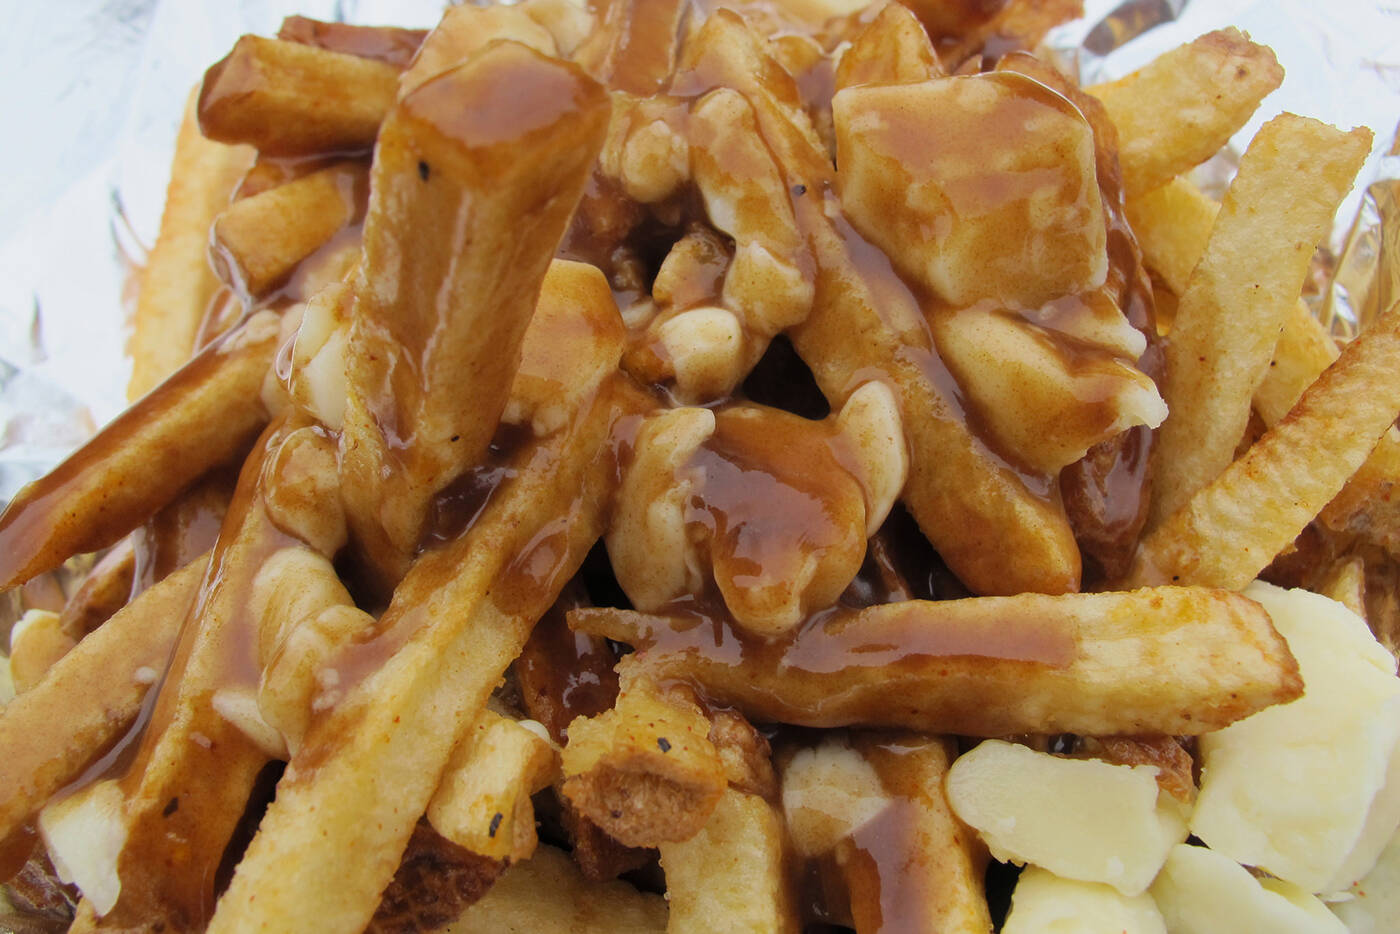 Quebec diner Le Roy Jucep announced last week on Facebook it was temporarily replacing the word “poutine” with “fries cheese gravy”. The founder of Le Roy Jucep is among those who claim to have created the fast-food staple. Photo by Crispin Semmens/used under common license